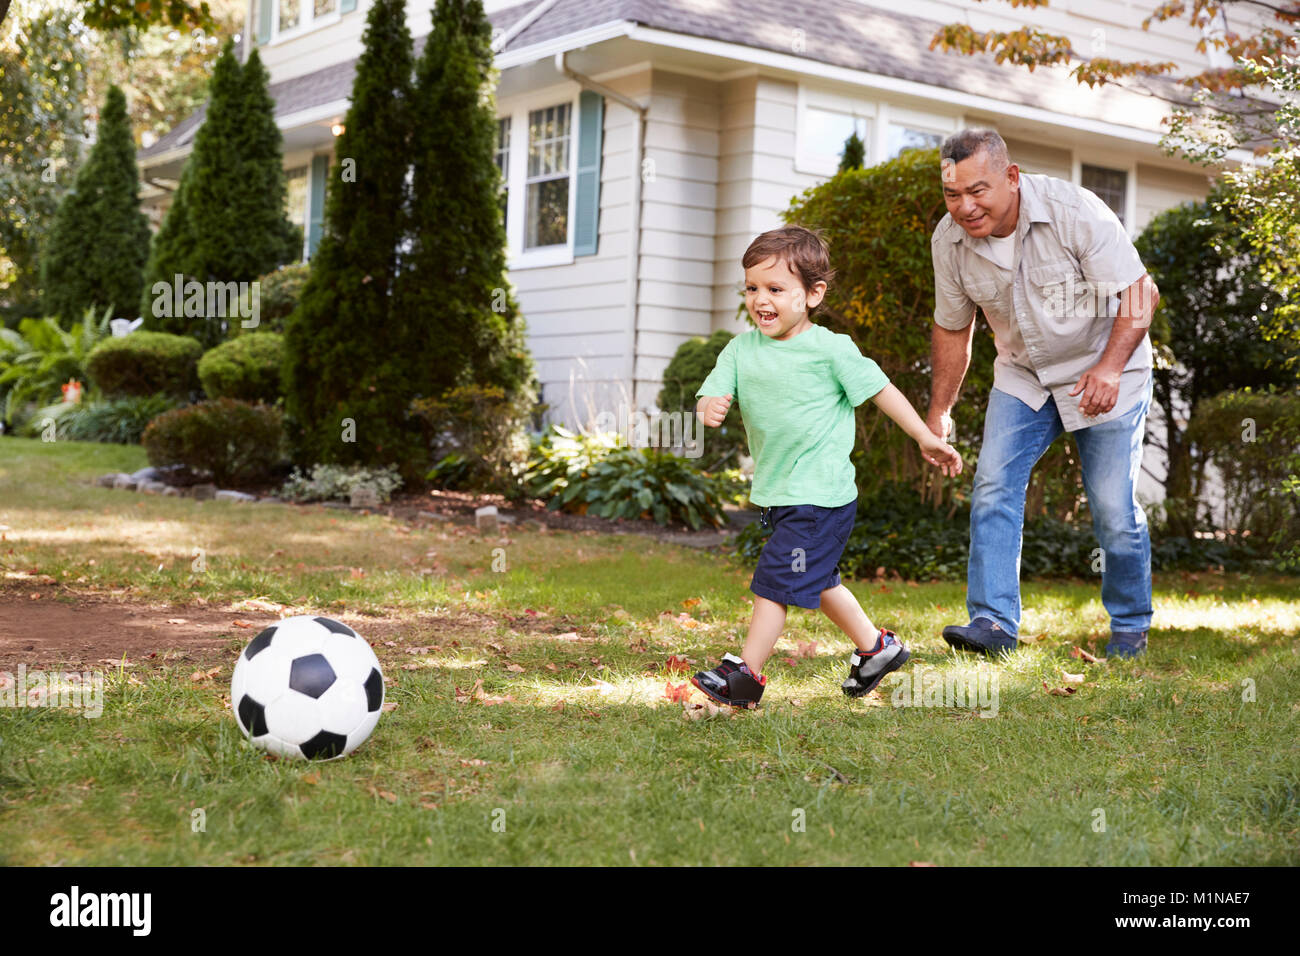 Grandfather Playing Soccer In Garden With Grandson Stock Photo